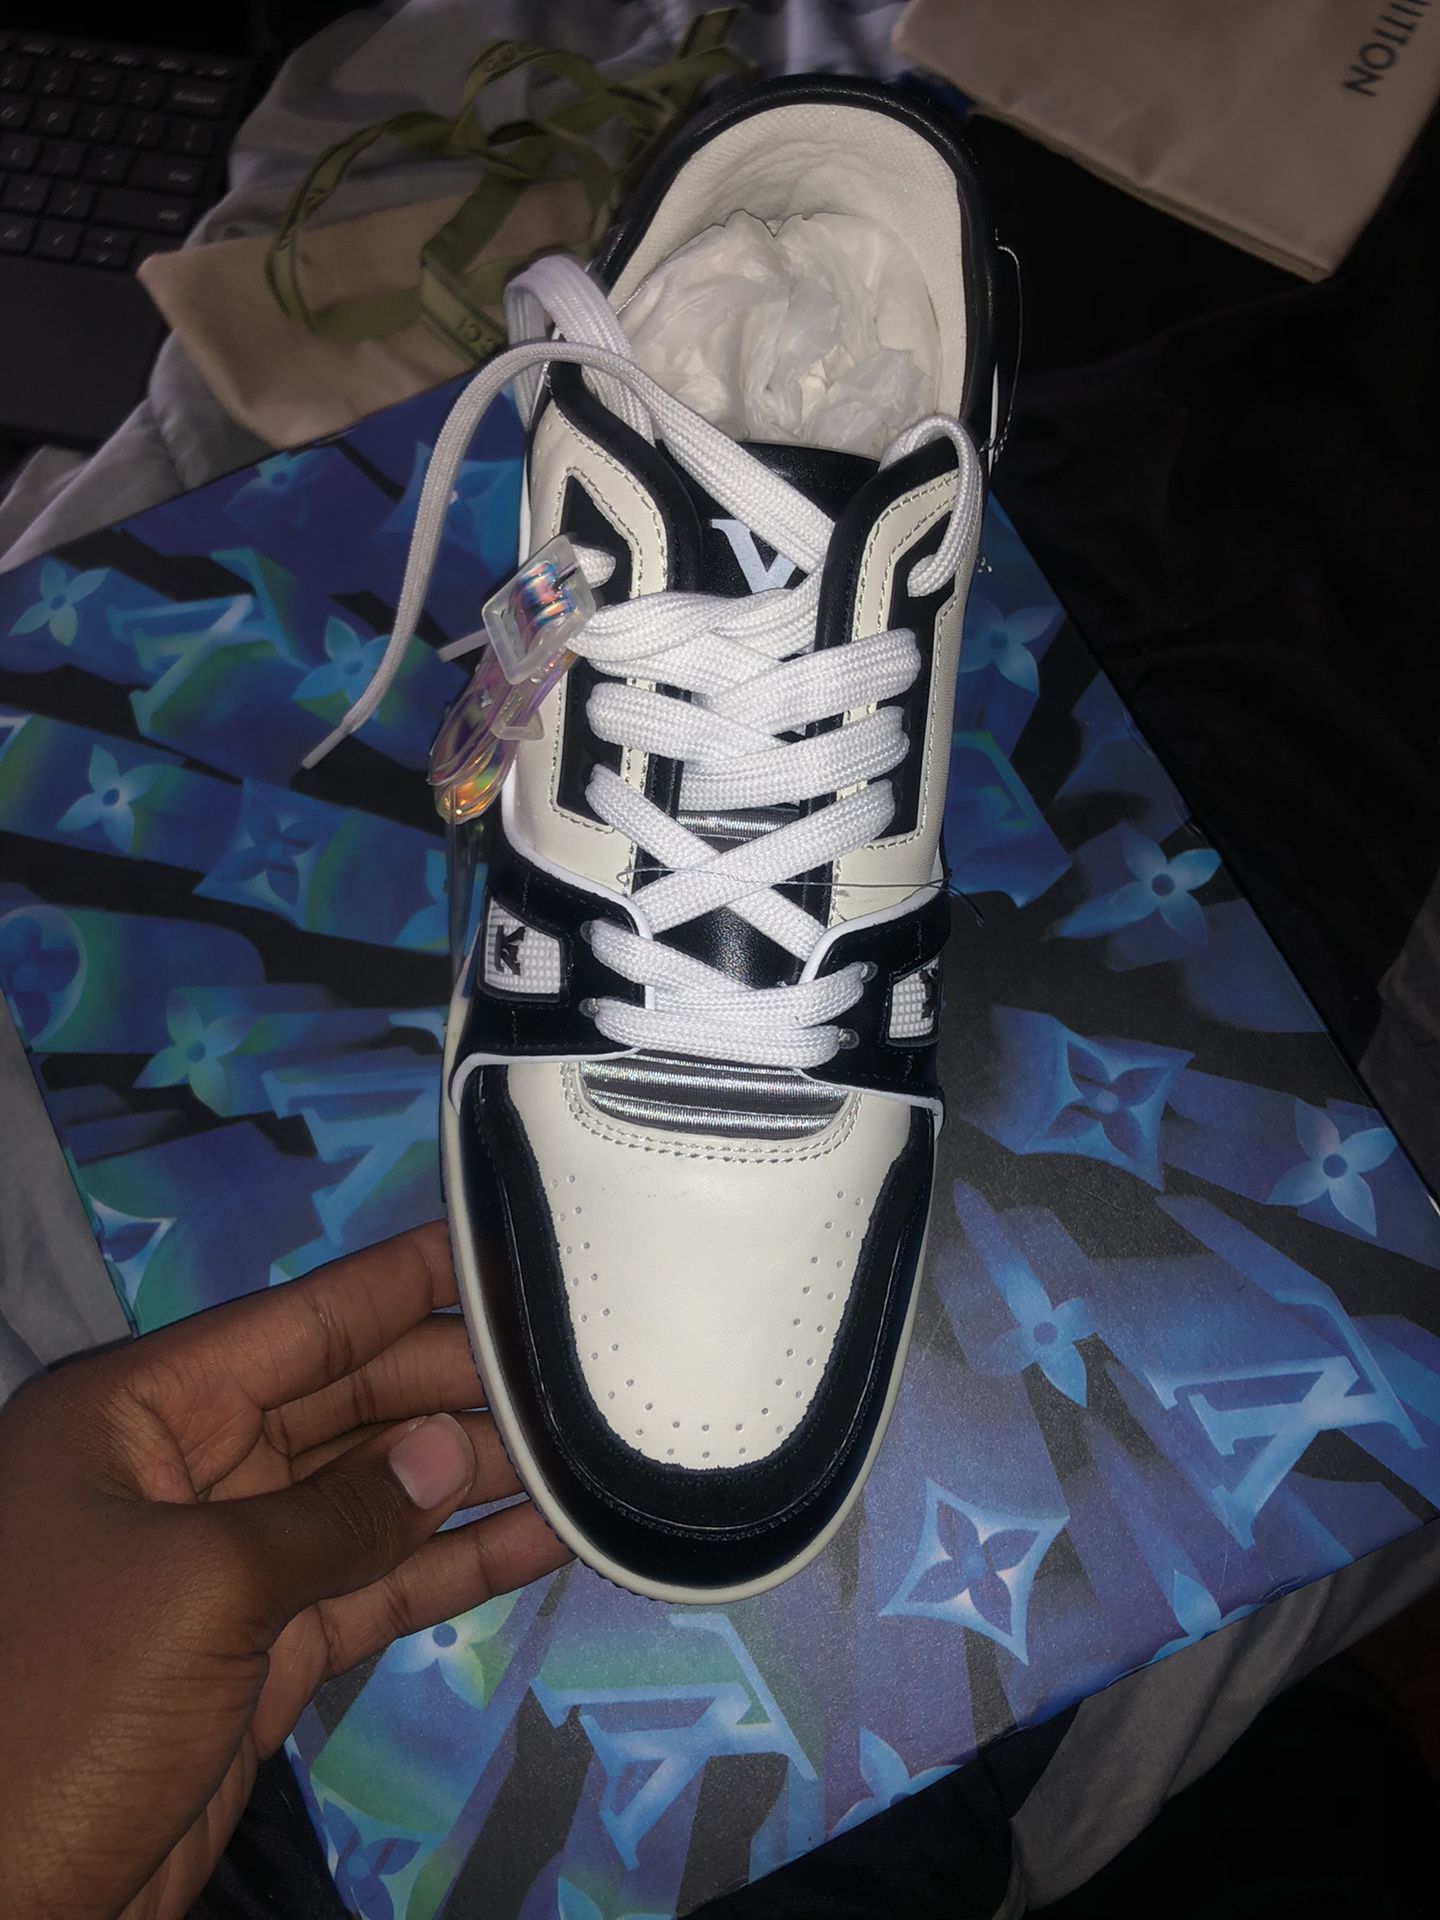 Louis vuitton sneakers for Sale in Washington, DC - OfferUp